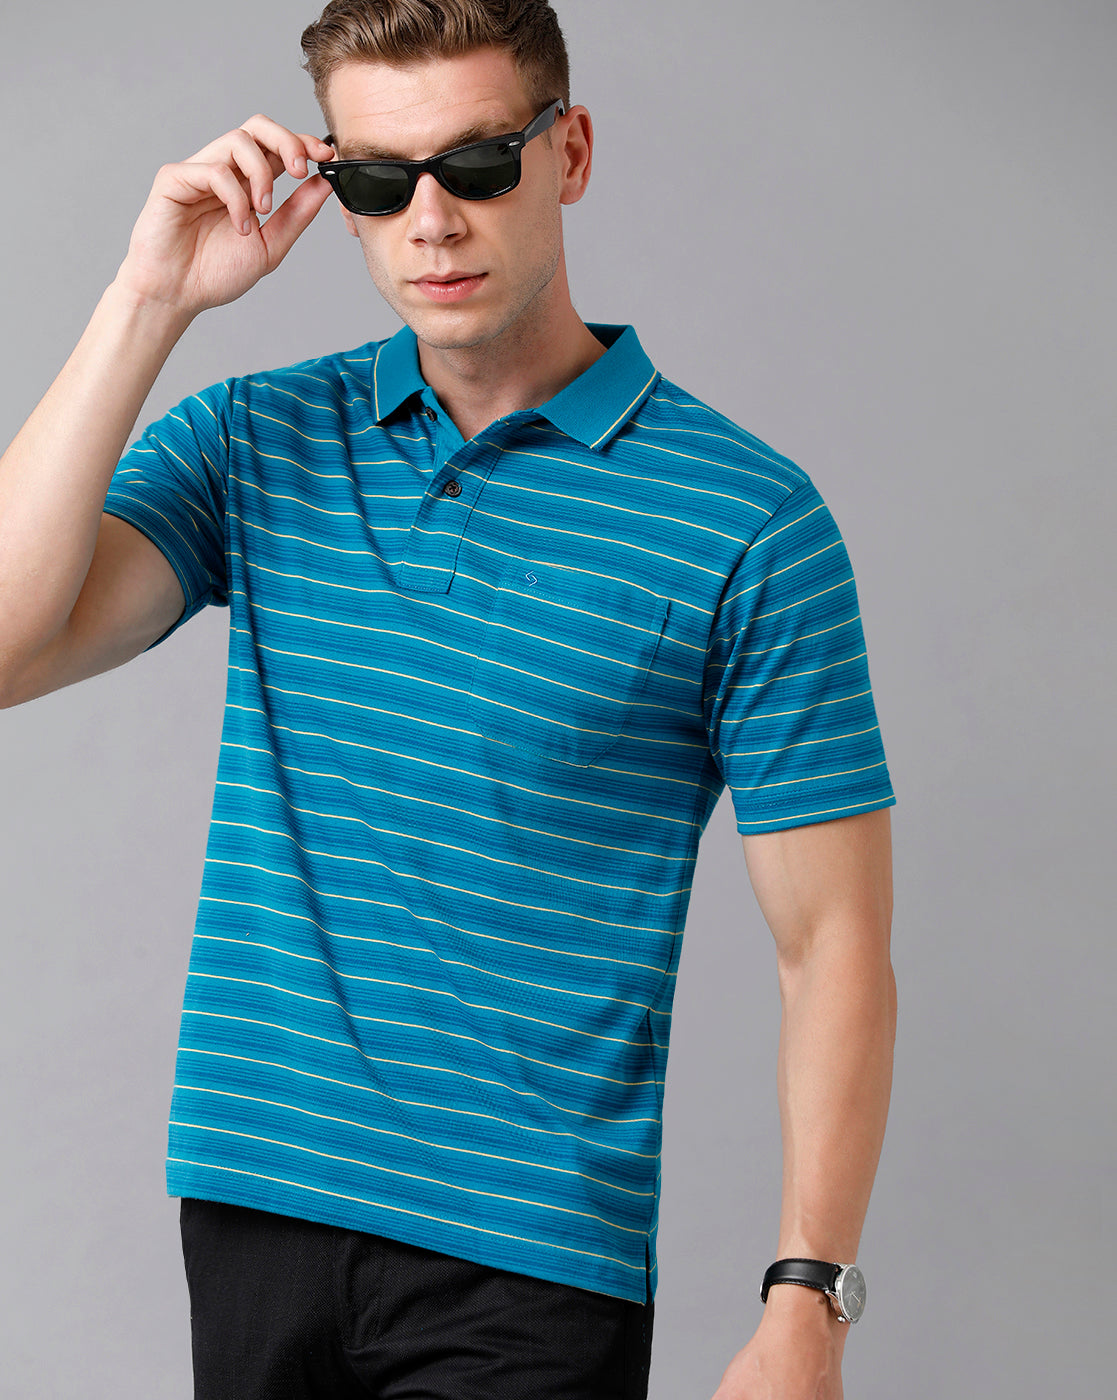 Classic Polo Men's Cotton Striped Half Sleeve Regular Fit Polo Neck Blue Color T-Shirt | Feeders - 206 A